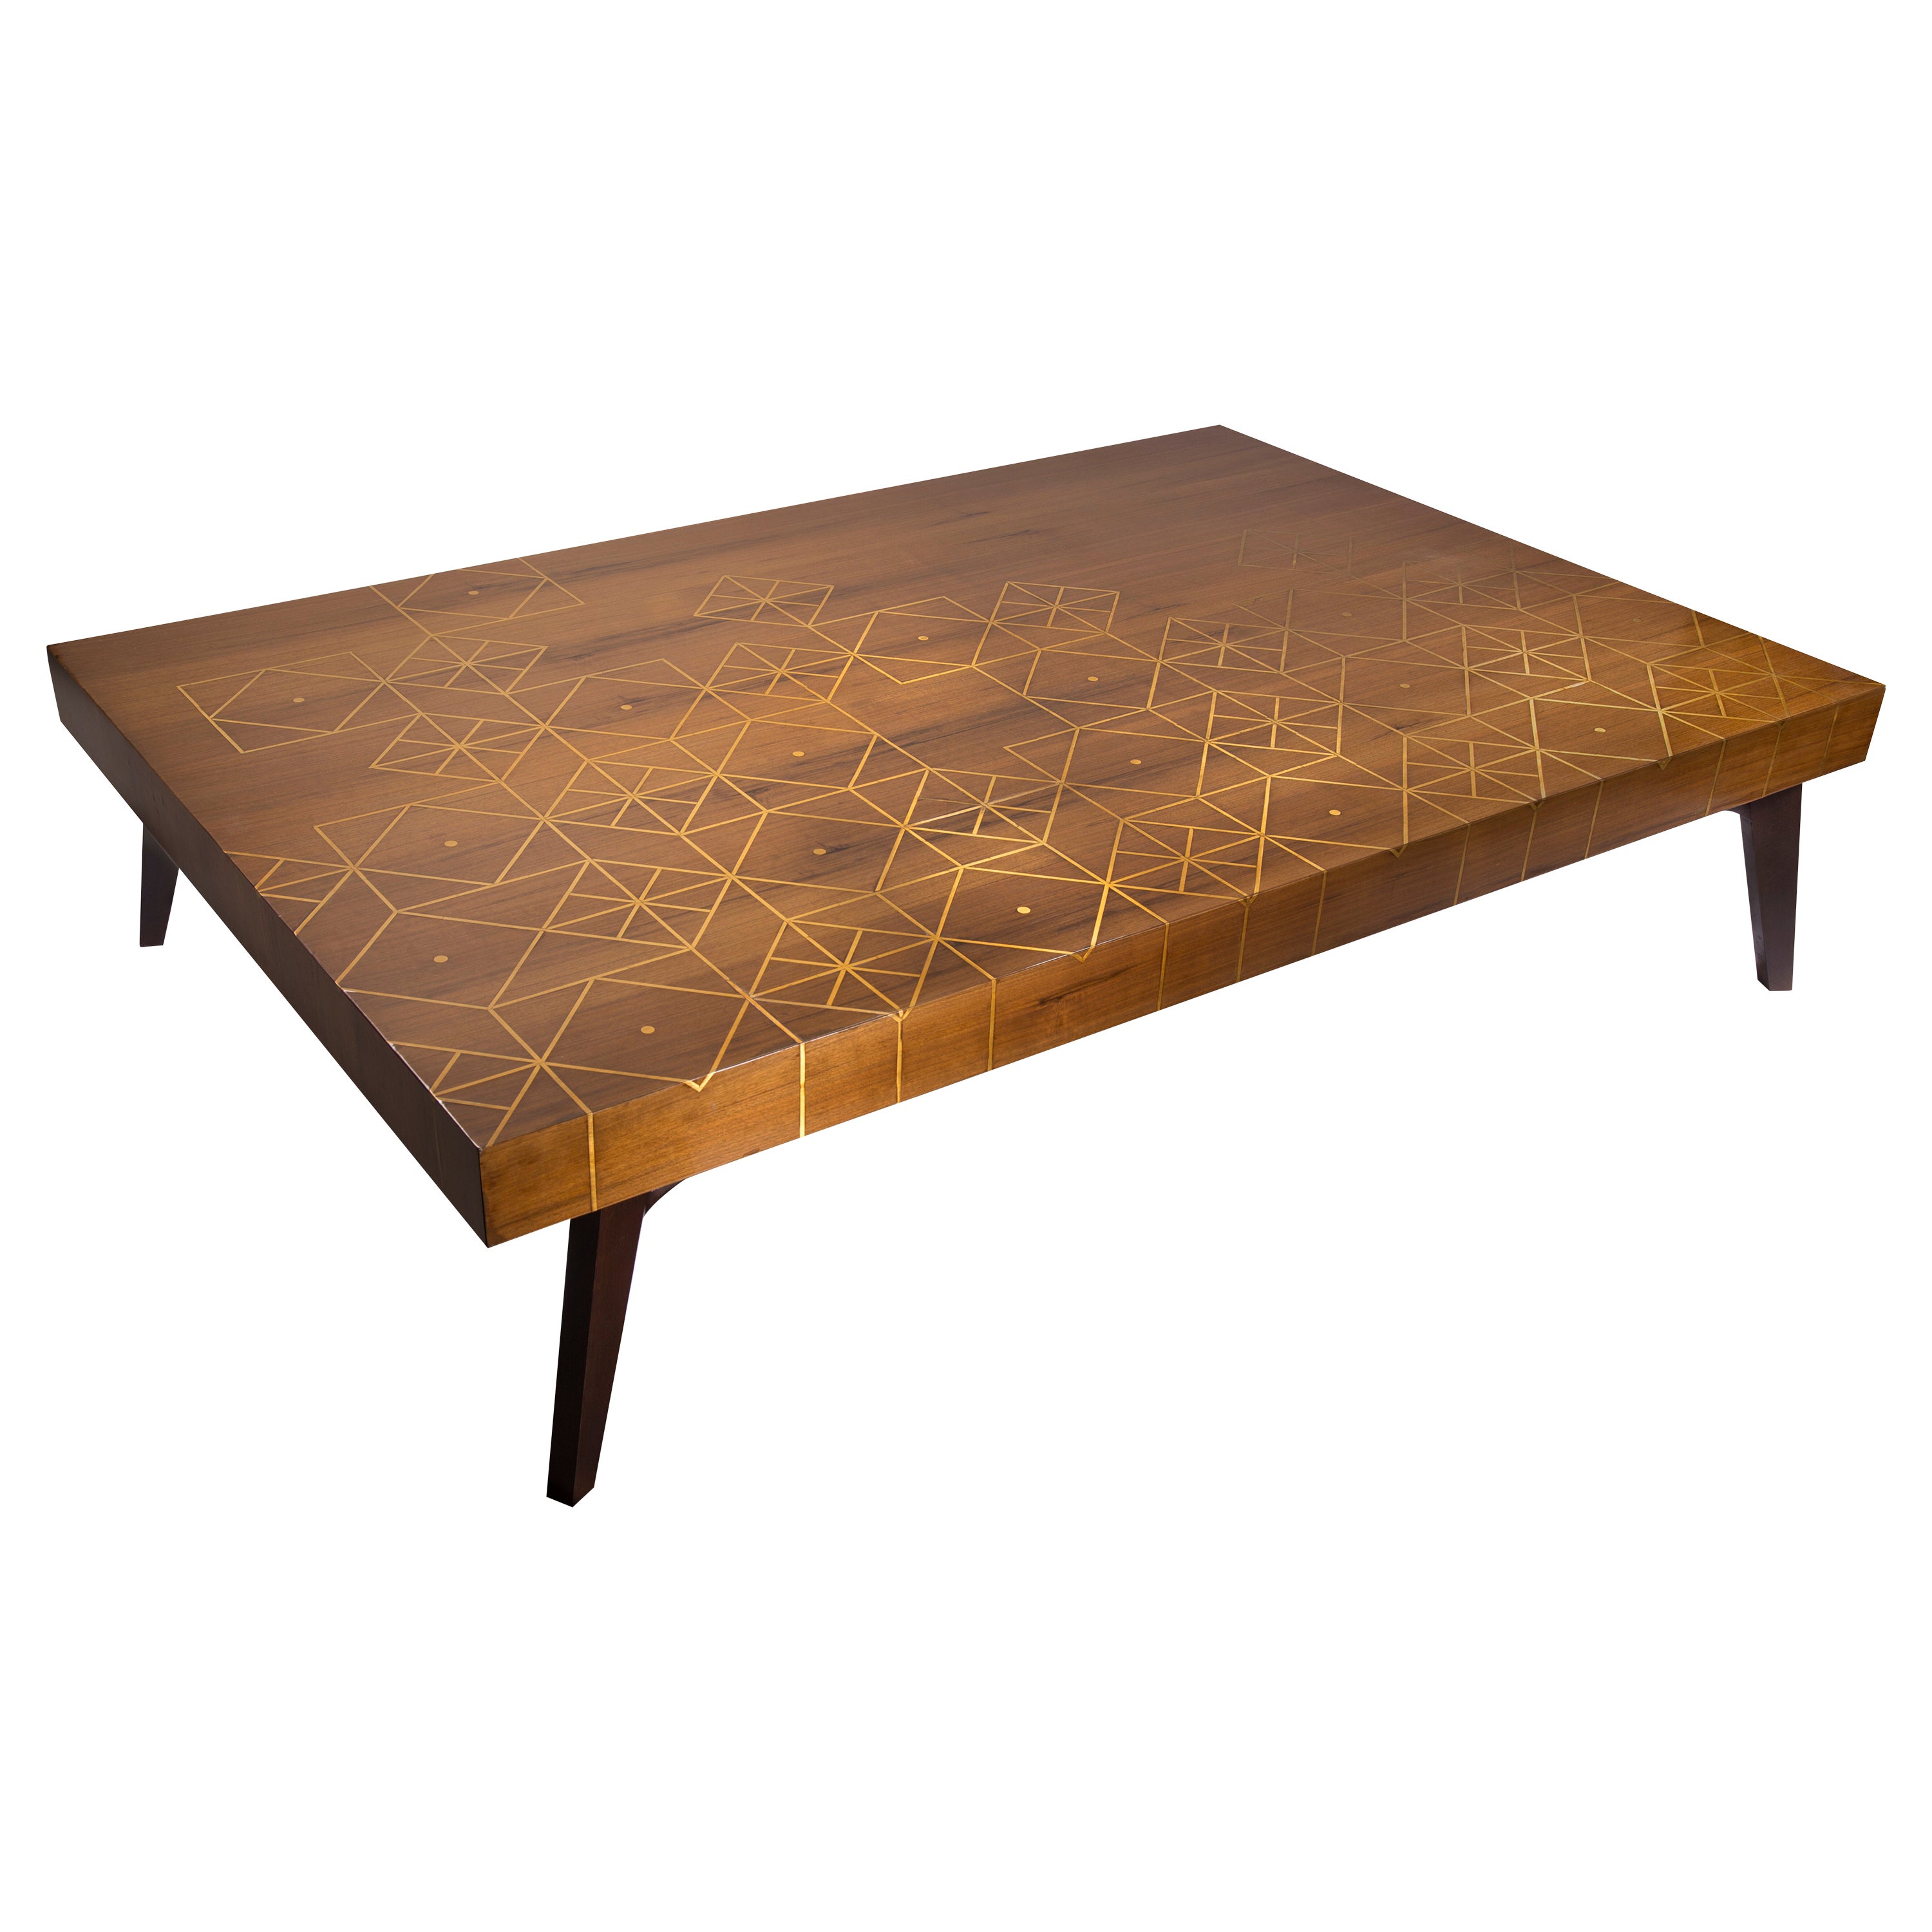 Walnut Coffee Table with Handcrafted Brass Inlay Inspired from a Nubian Motif